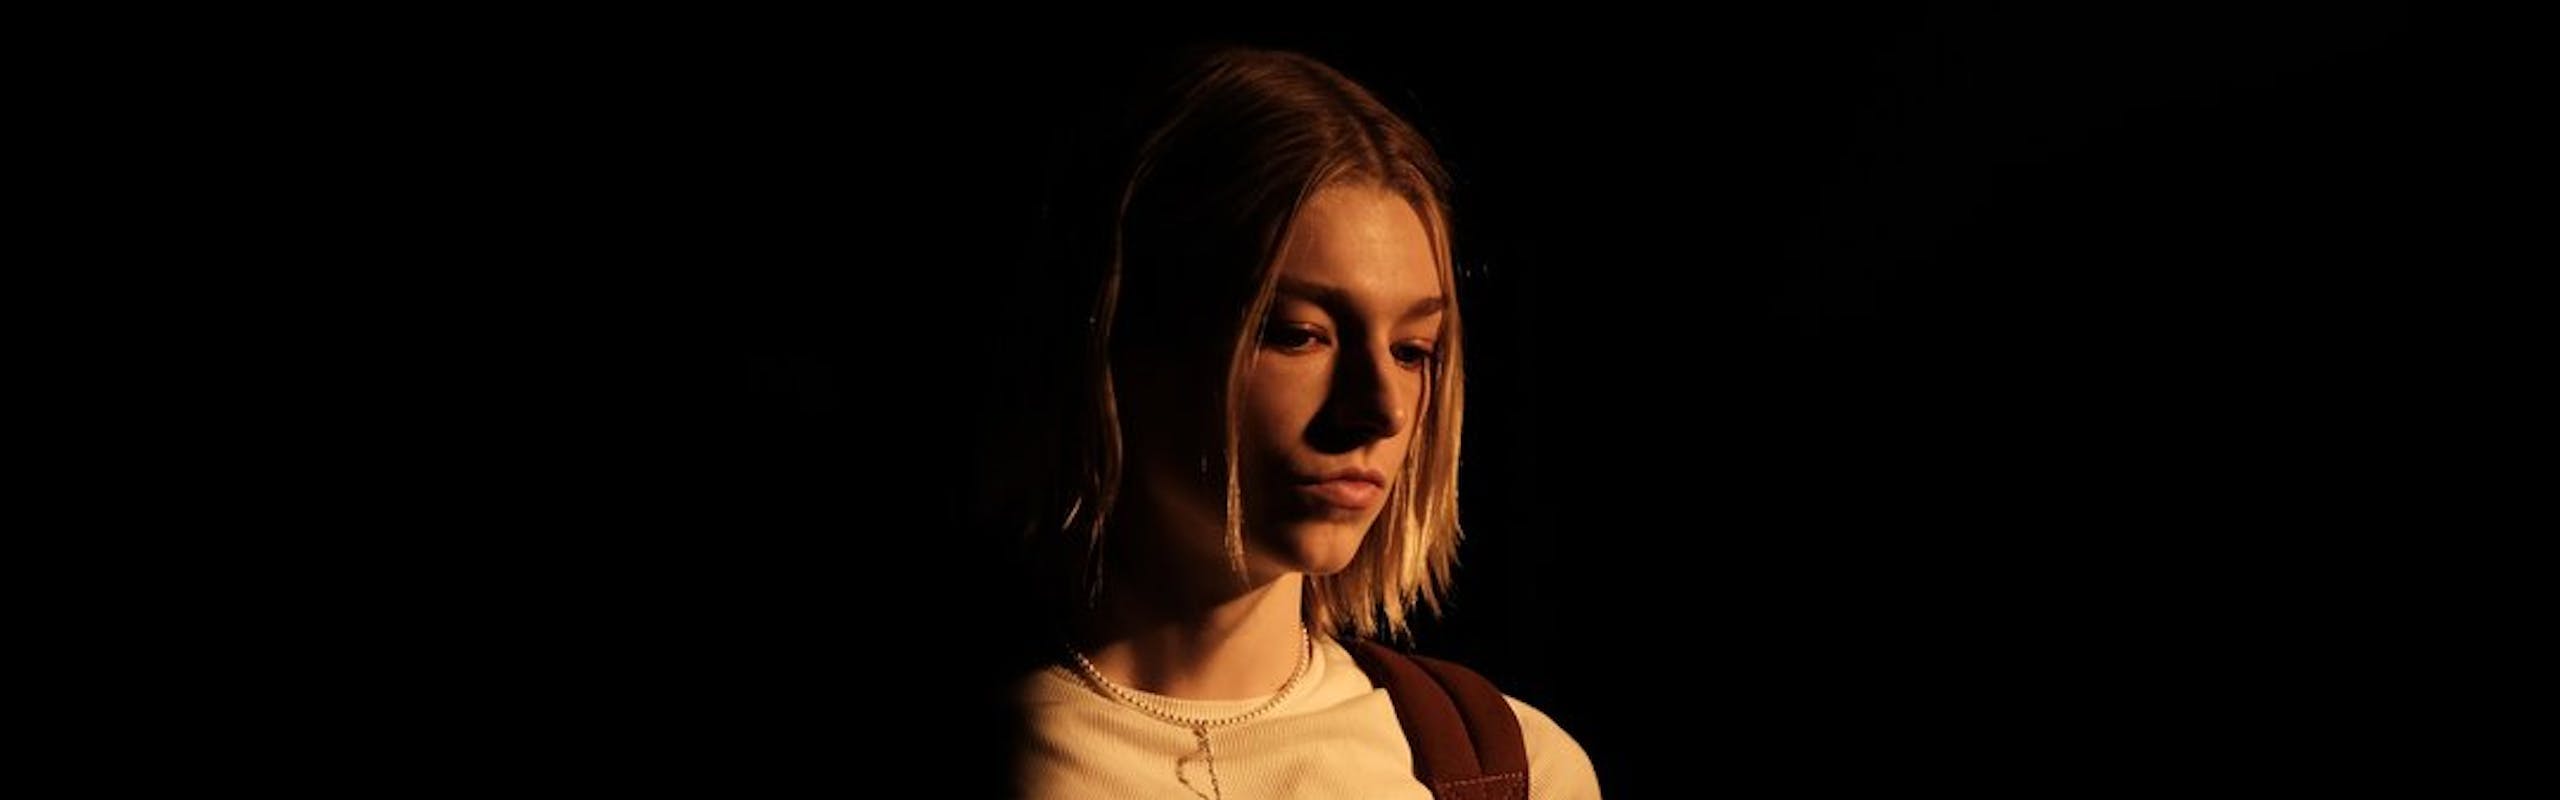 Hunter Schafer. © 2022 Home Box Office, Inc. All rights reserved. HBO® and related channels and service marks are the property of Home Box Office, Inc.